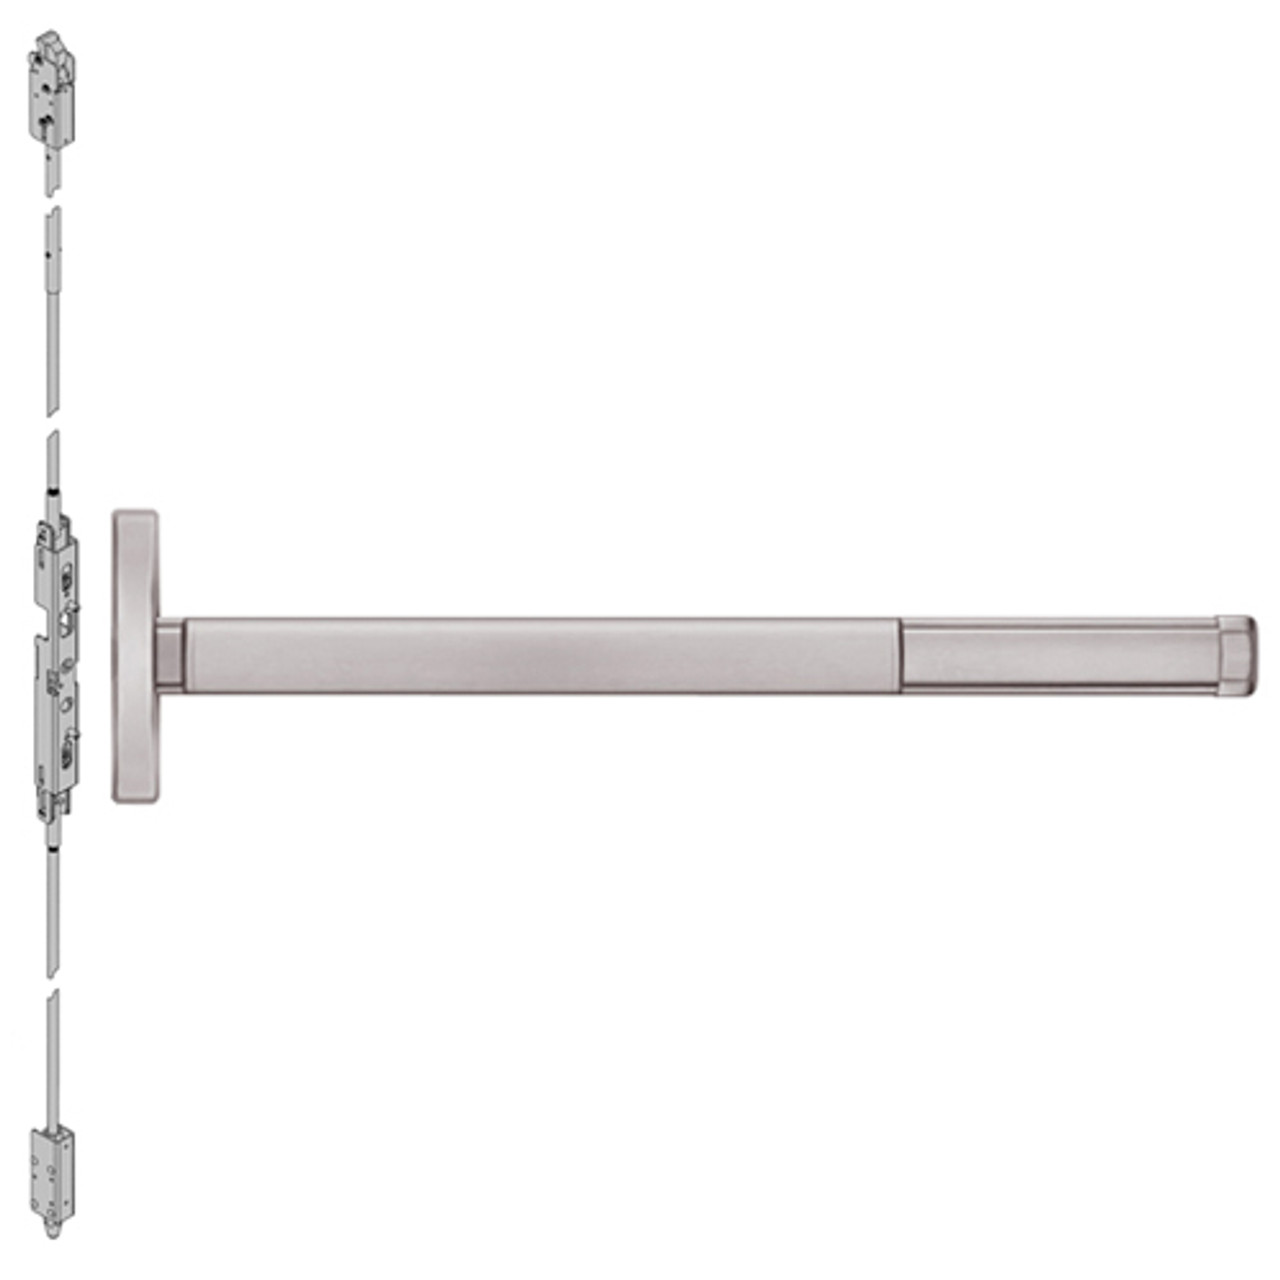 DE2602-628-36 PHI 2600 Series Concealed Vertical Rod Exit Device with Delayed Egress Prepped for Dummy Trim in Satin Aluminum Finish